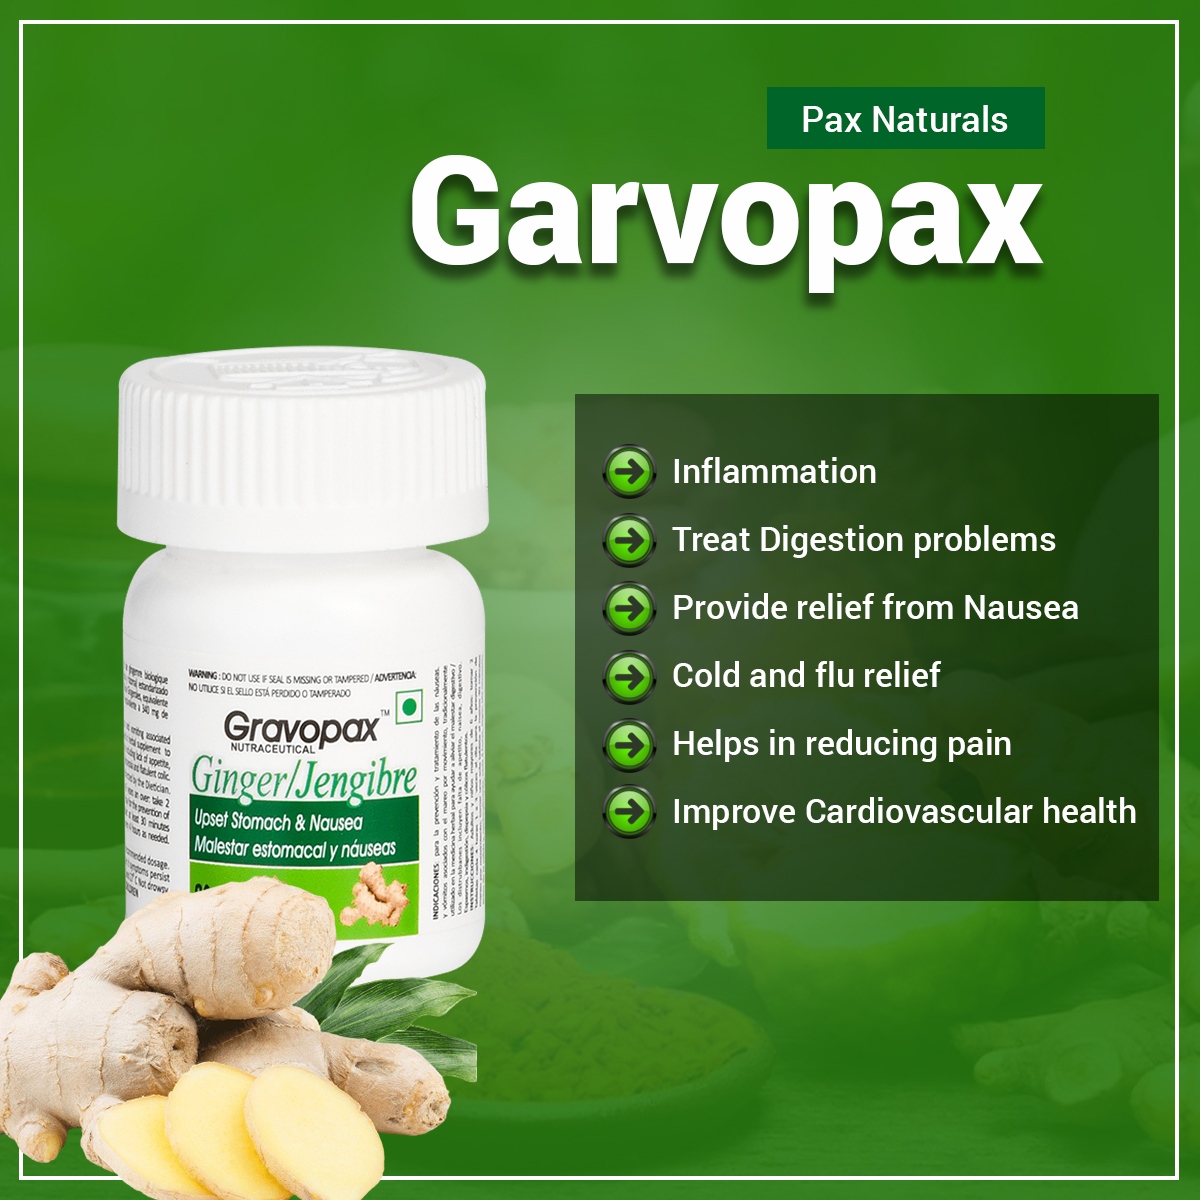 Treat your Digestion problems with Pax Naturals Garvopax.

The product is available at a discounted rate of Rs. 270/-

Shop now at - bit.ly/3dw0f1b

#PaxNaturals #Garvopax #GingerTablets #Ginger #Health #Healthy #Healthcare #HealthyLifestyle #HealthyImmunity #GutCare